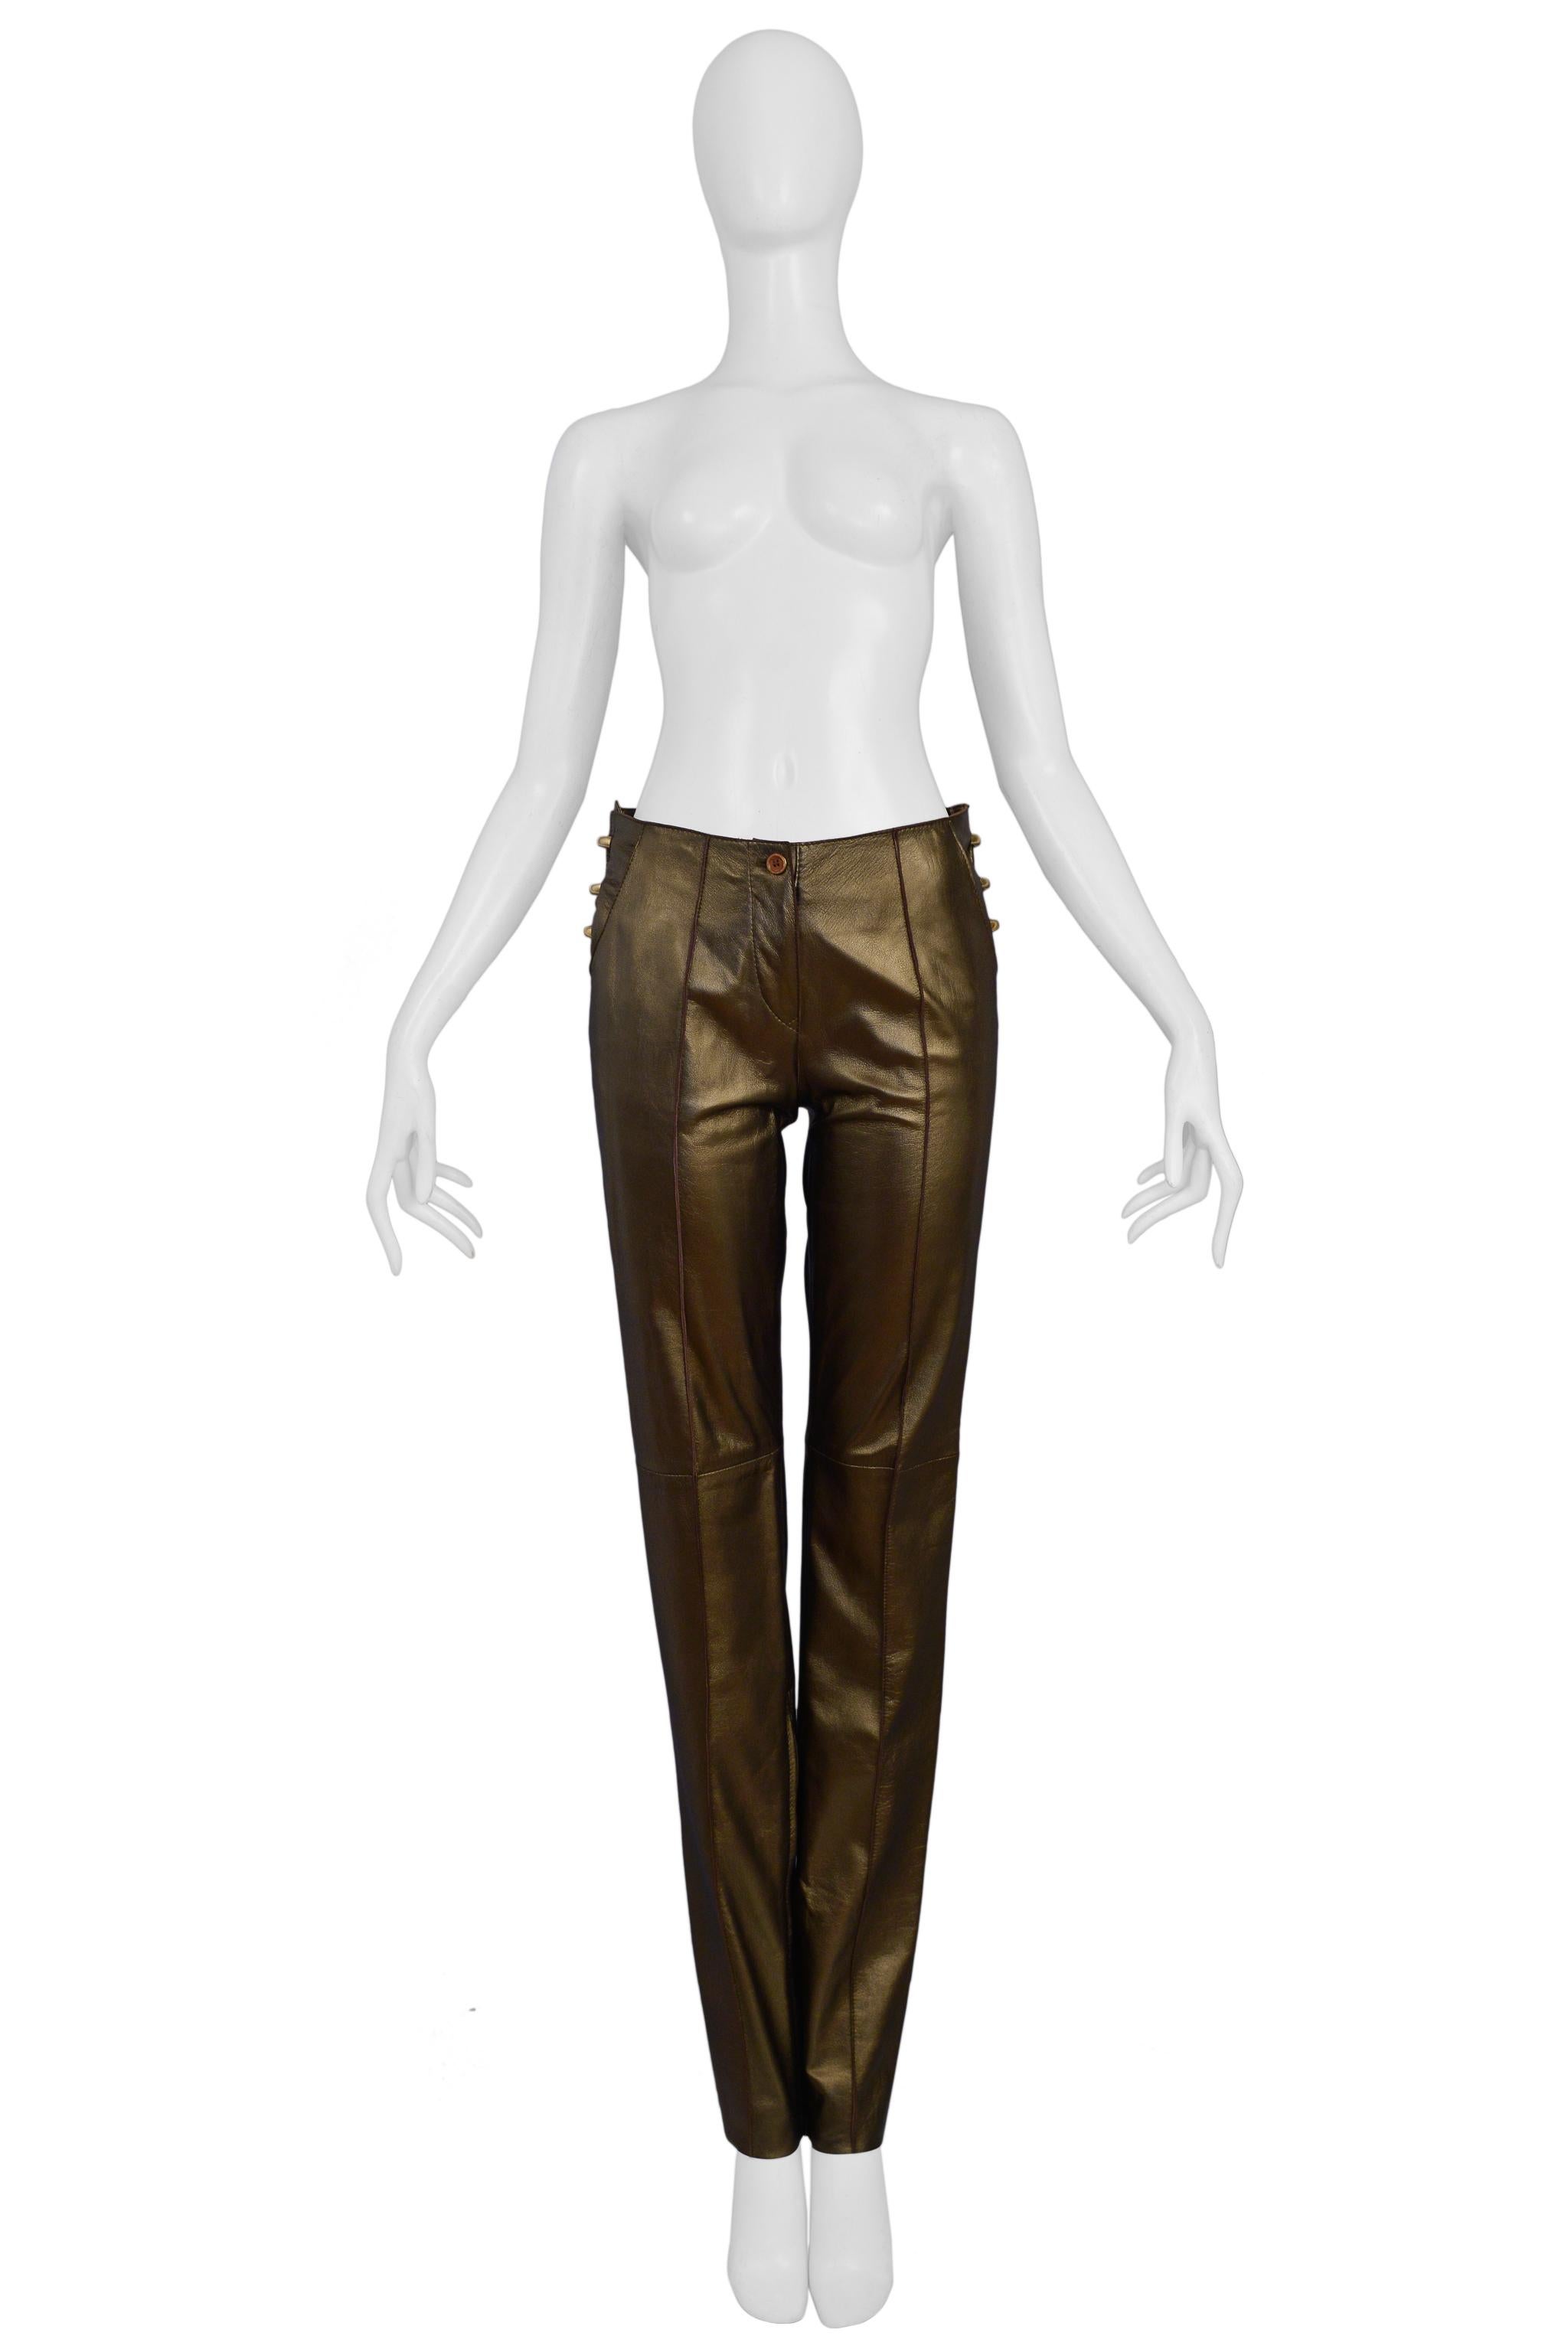 Resurrection Vintage is excited to offer a vintage pair of Gianfranco Ferre bronze lambskin leather pants featuring a center front zipper and button, large brass side hardware, ankle zippers, front and back pockets, and slim fit.  

Gianfranco